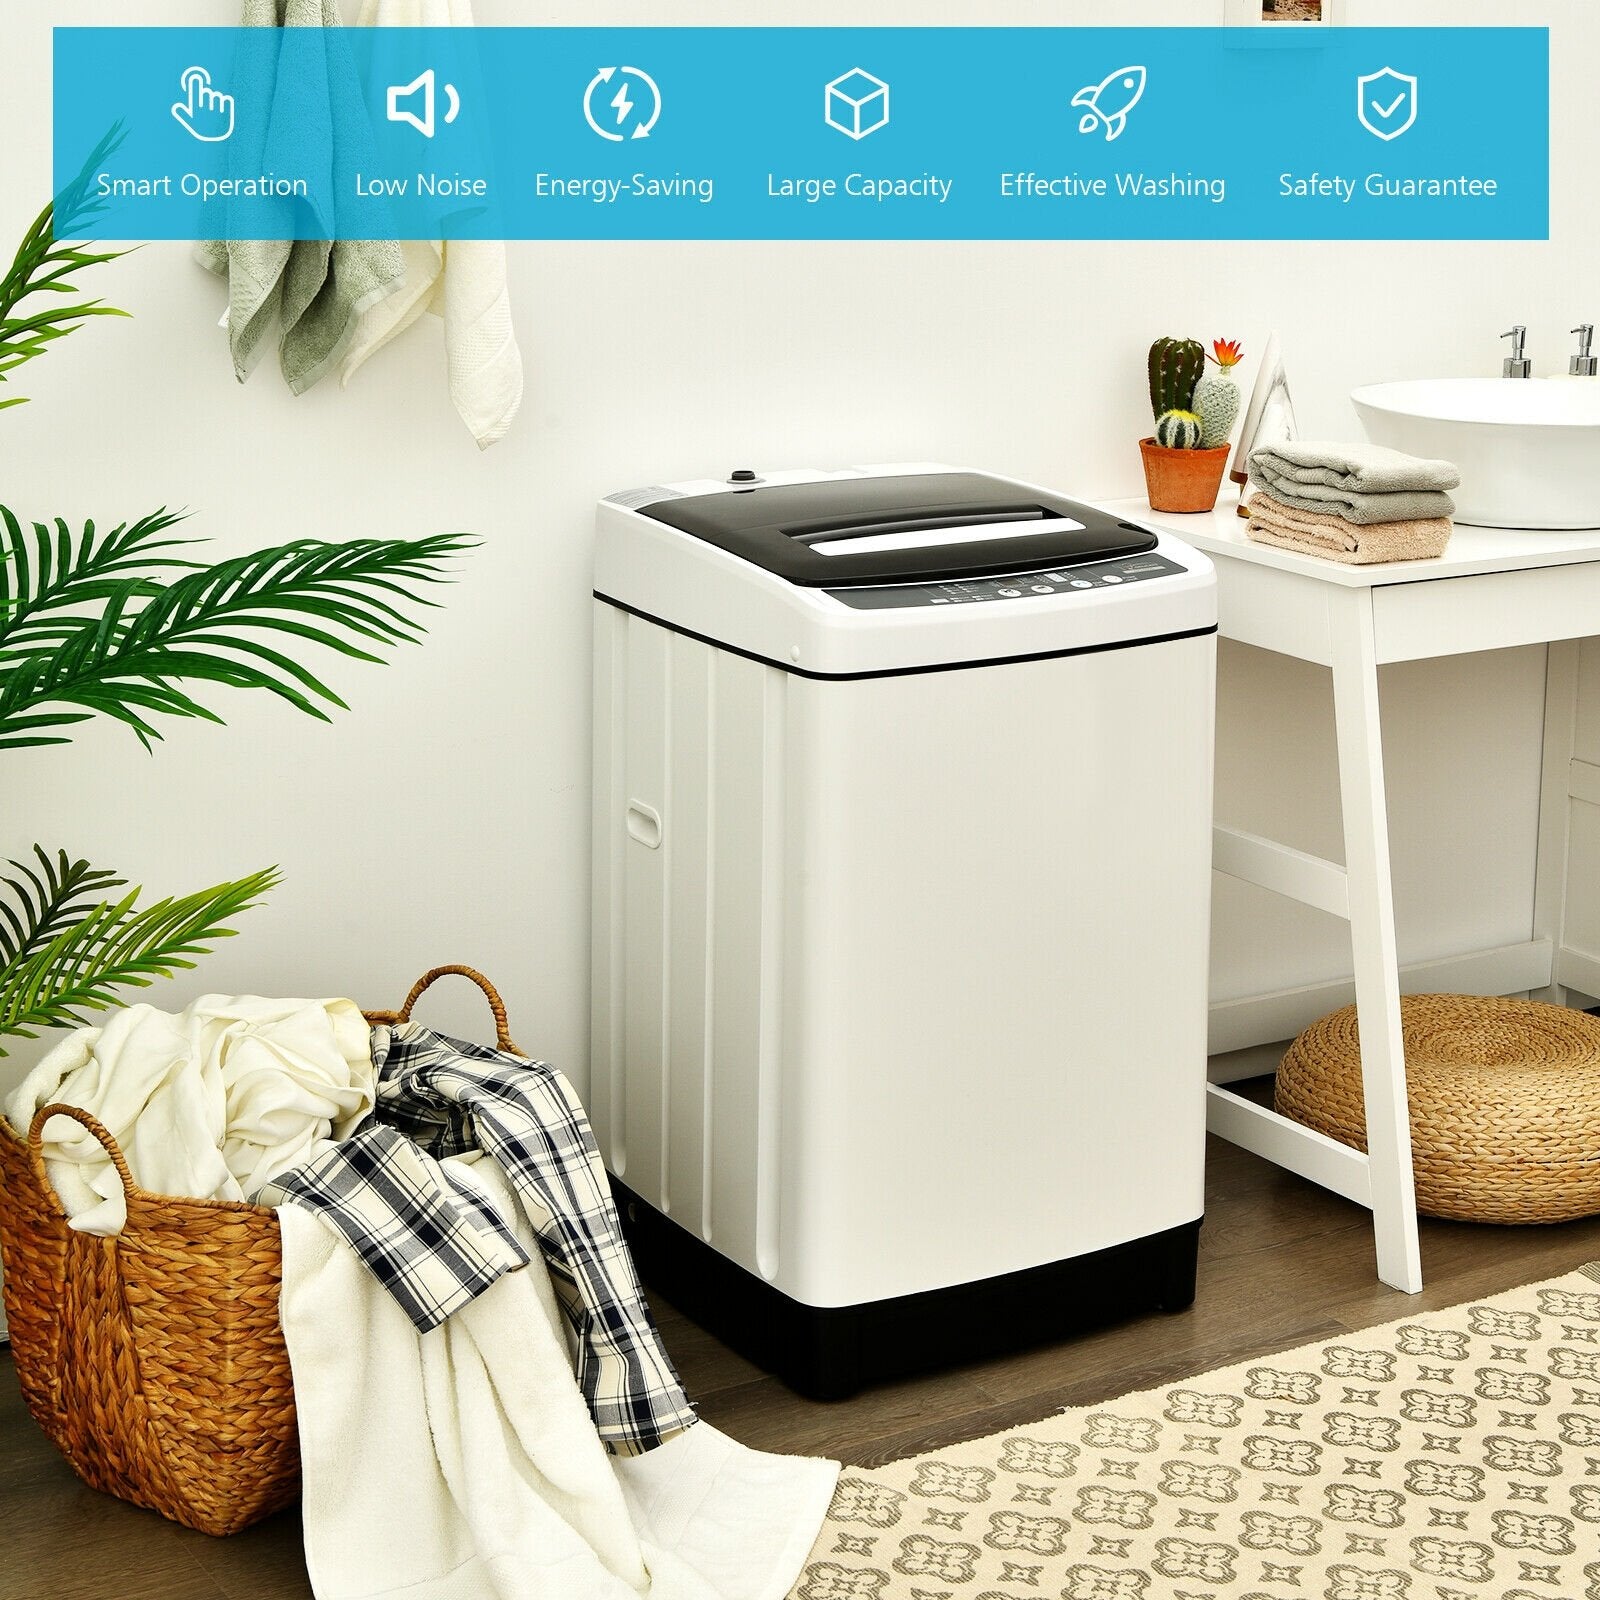 Full-Automatic Washing Machine 1.5 Cu.Ft 11 LBS Washer and Dryer, White at Gallery Canada